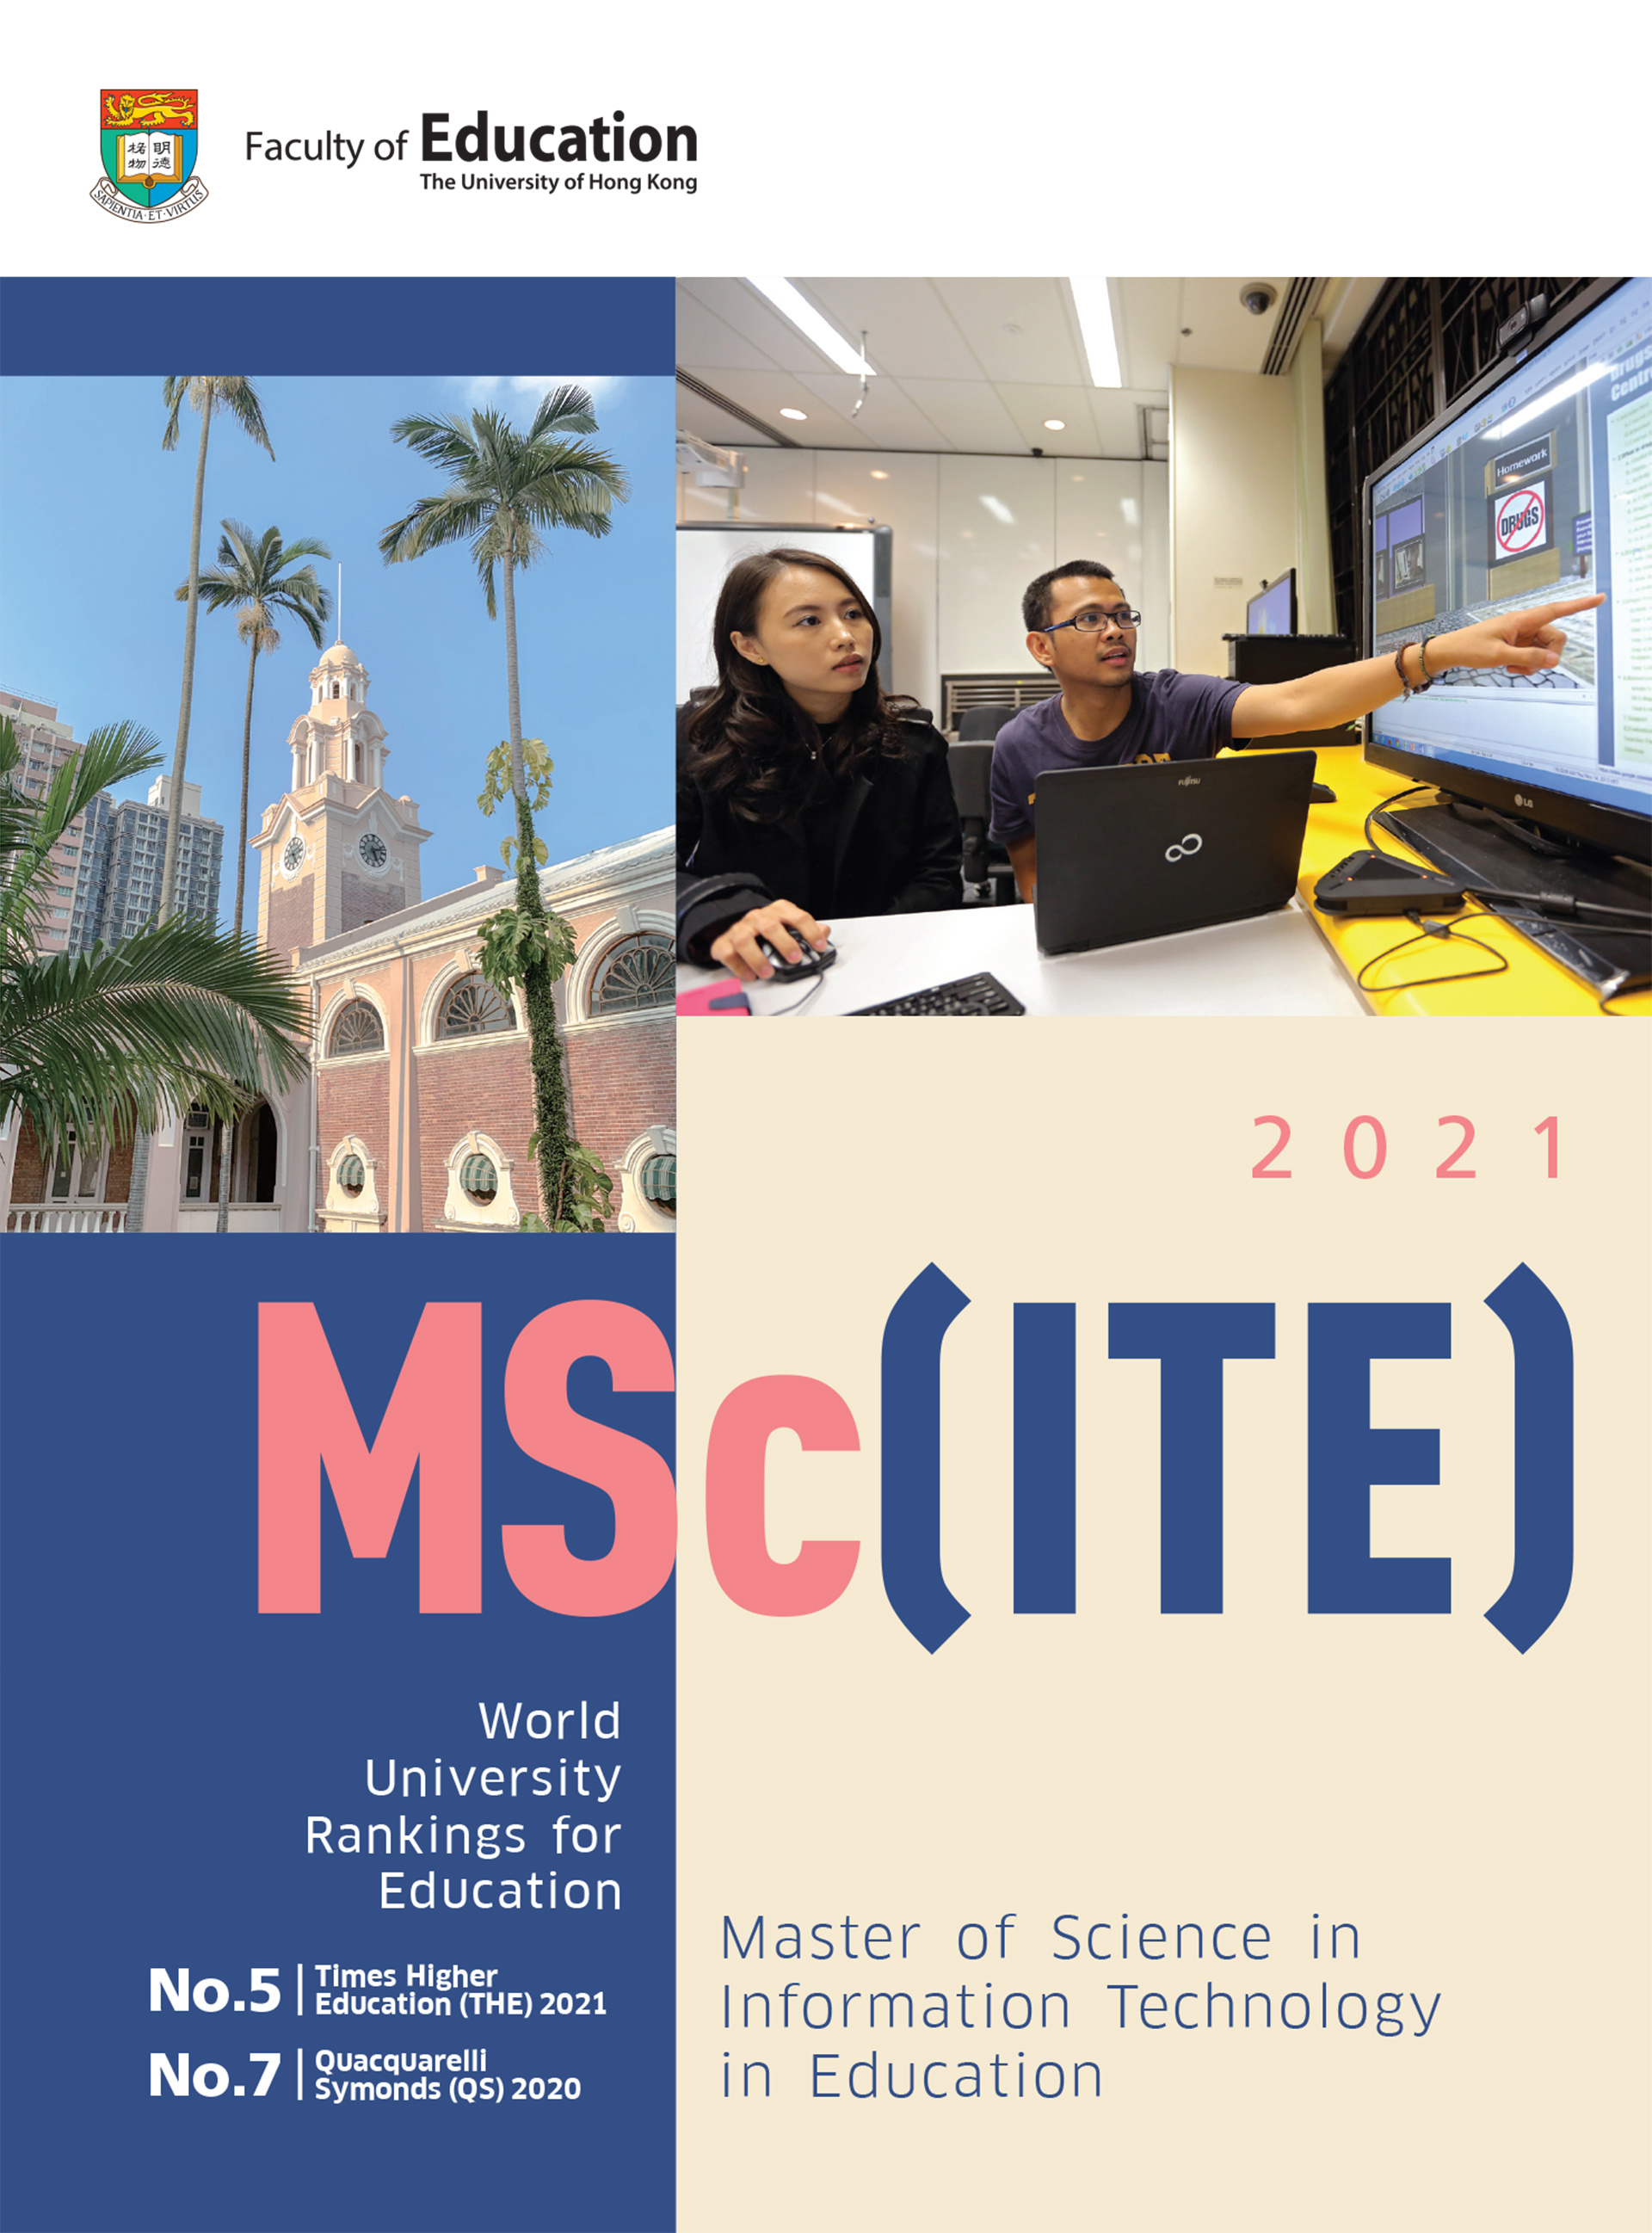 Application of MSc(ITE)